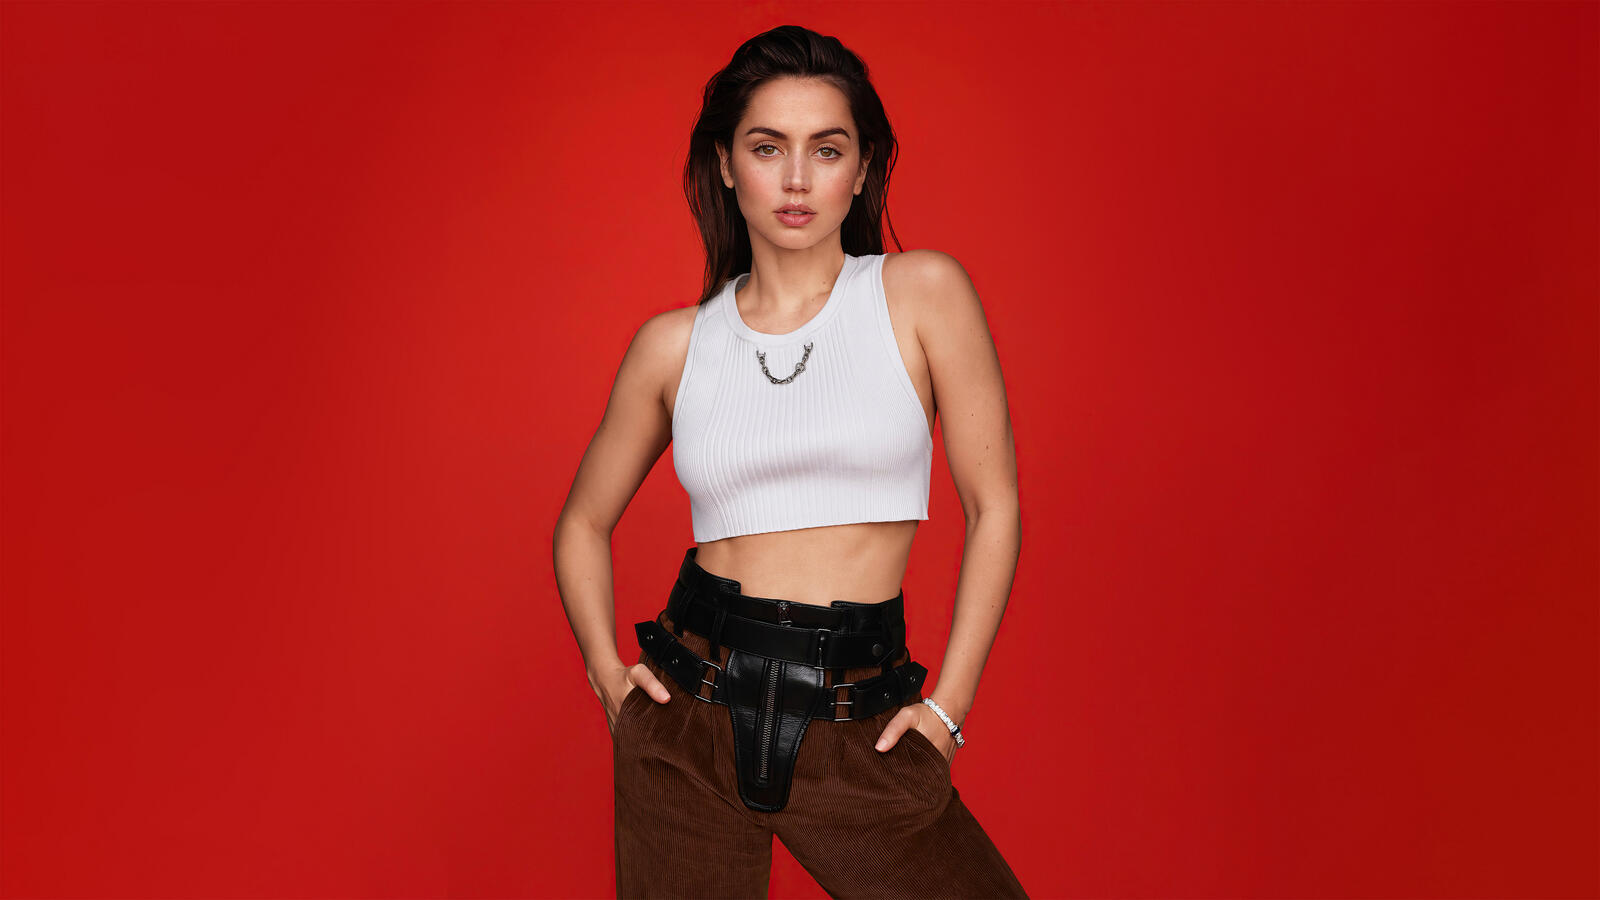 Free photo Ana de Armas poses against a red background